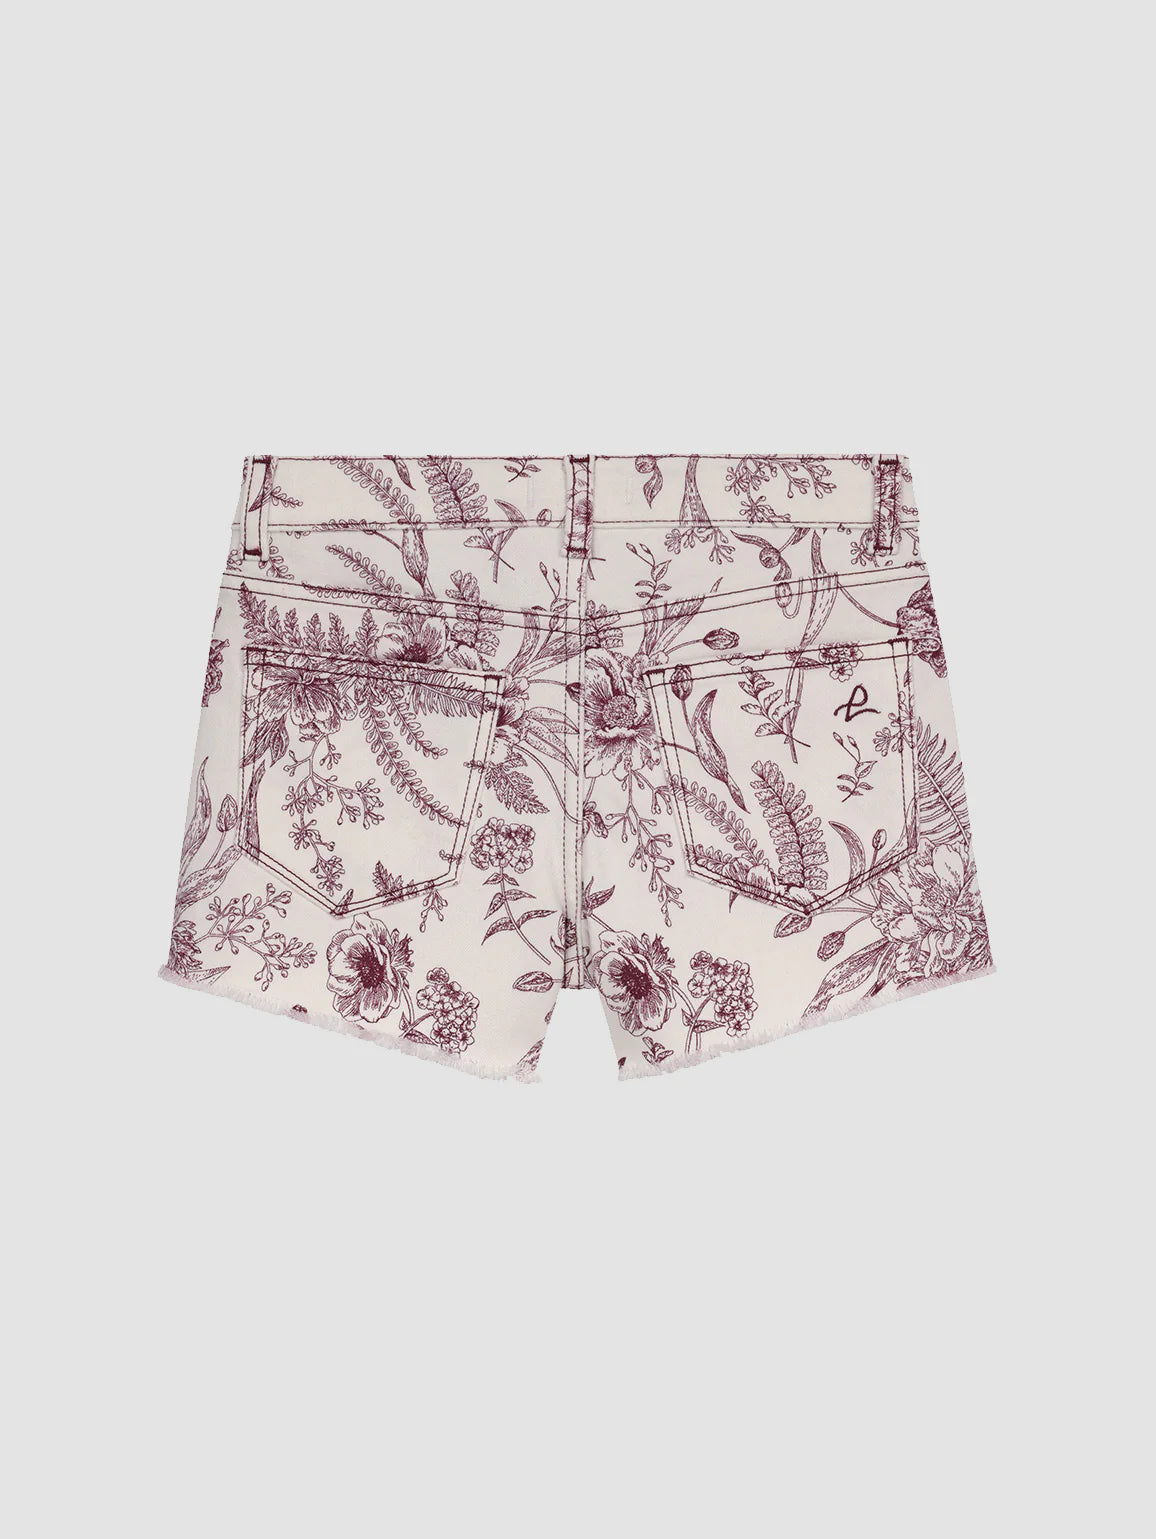 DL Lucy Youth Printed Shorts